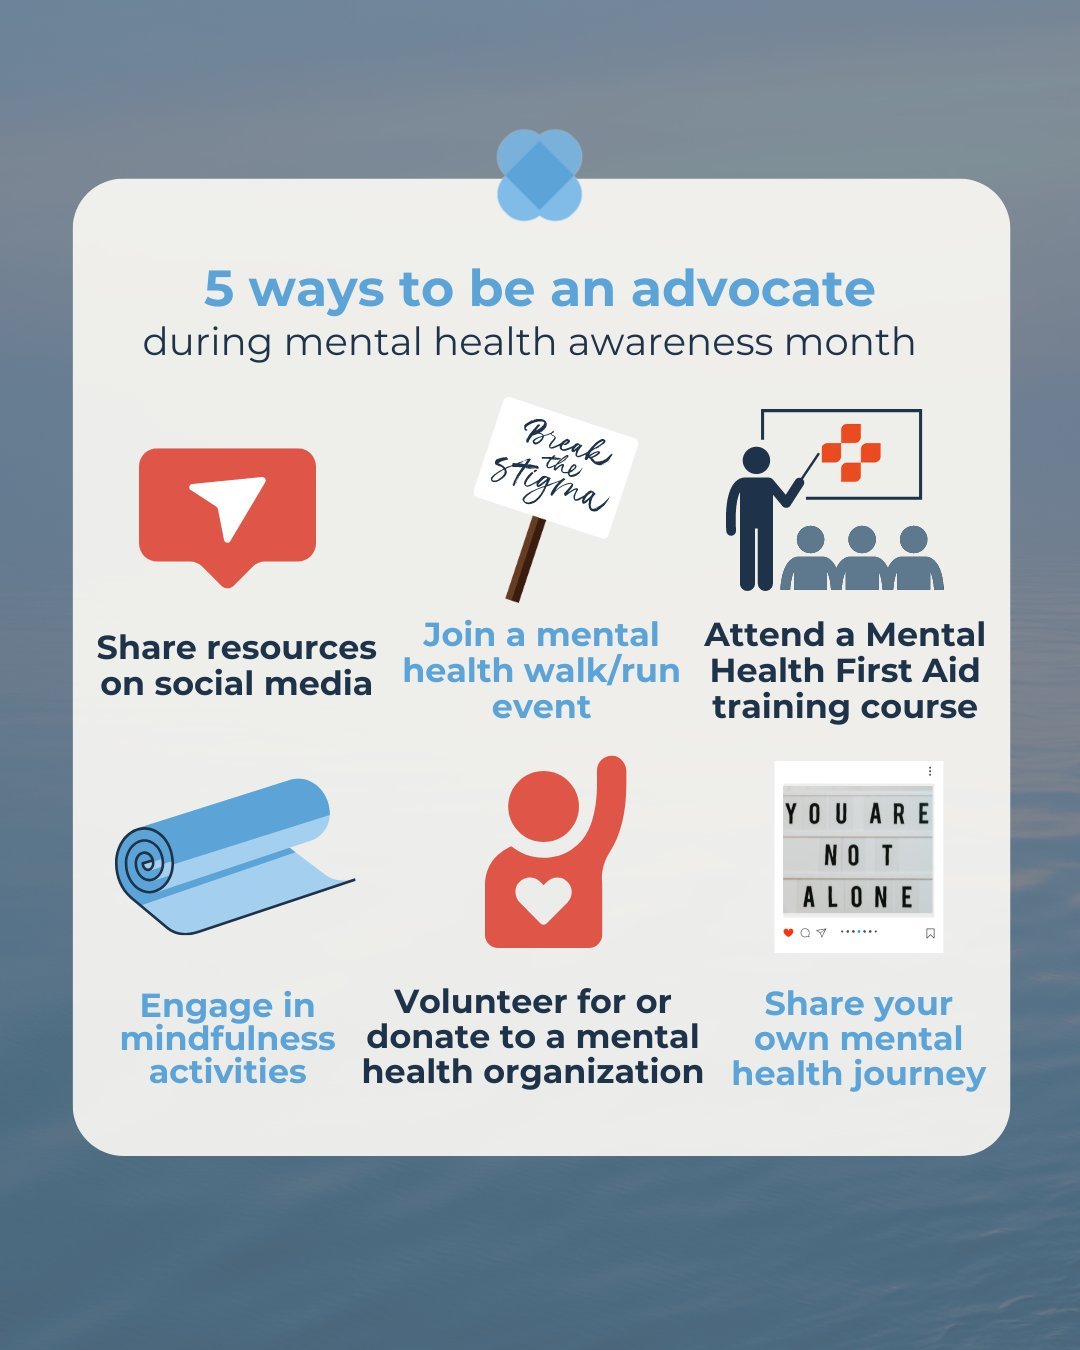 May is National Mental Health Awareness Month and we are excited to post tips, resources and research all month long! 🩵 To kick off this important holiday, here are 5 ways to be an advocate during mental health awareness month:

1. Share mental heal